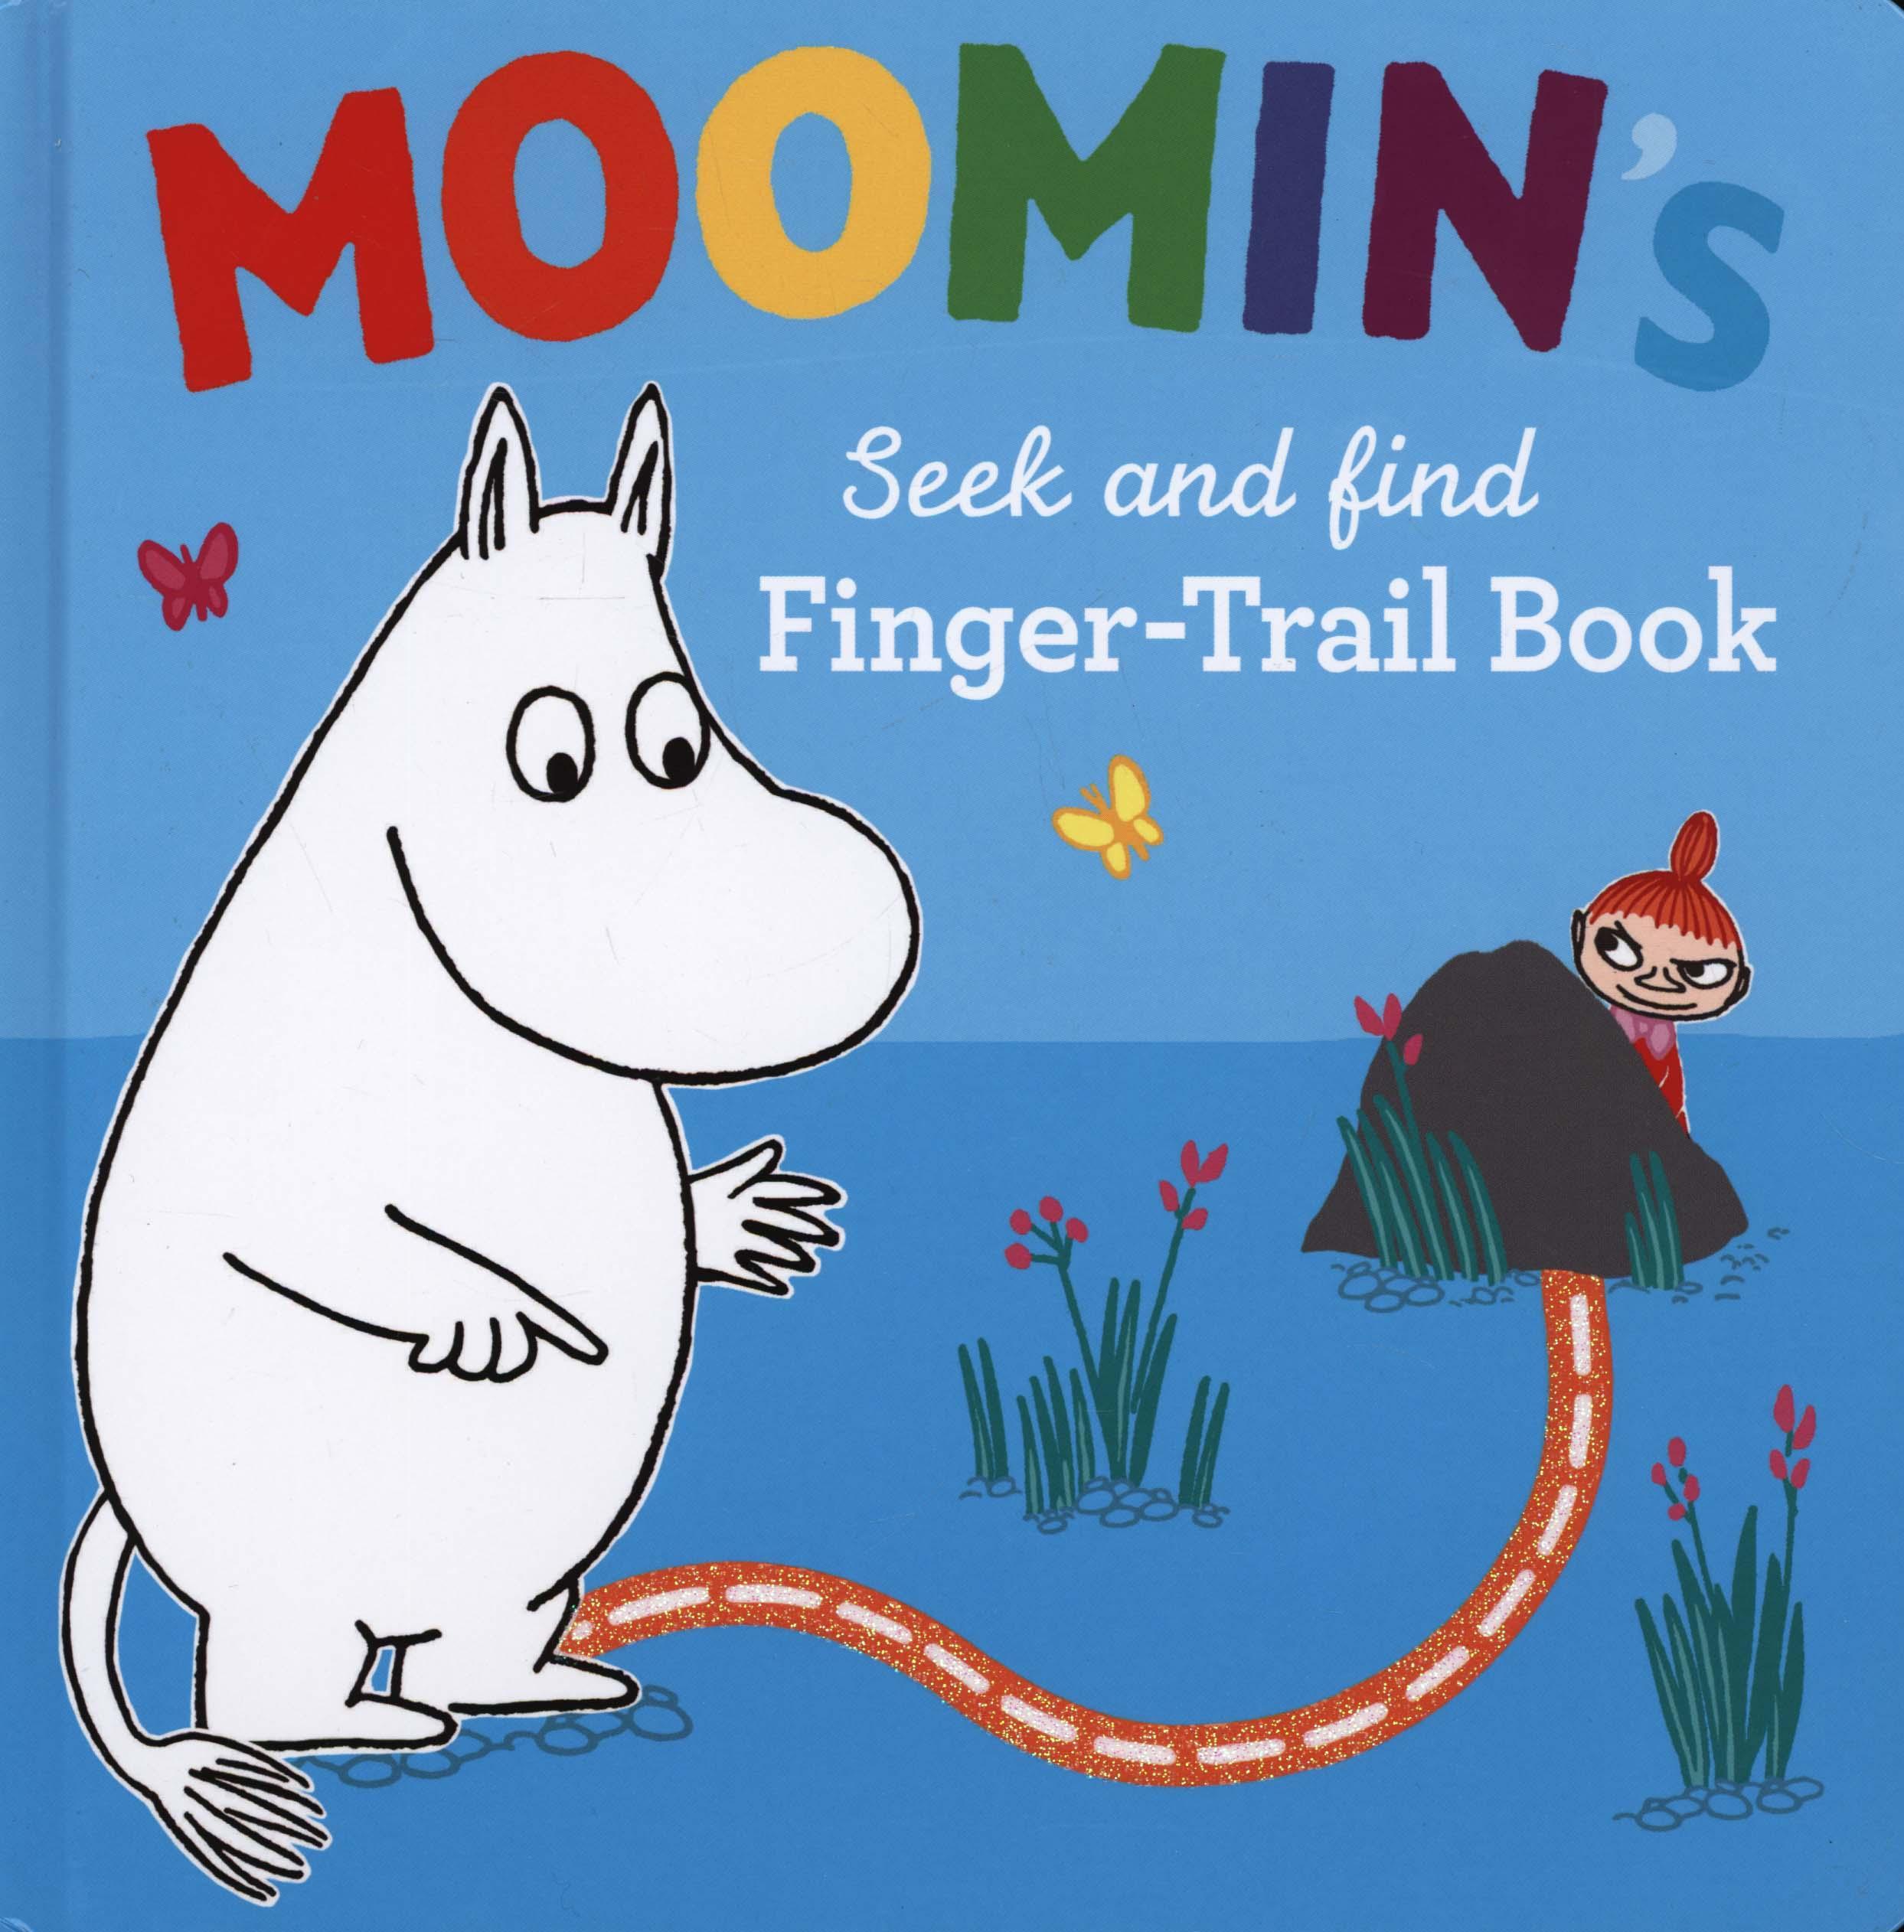 Moomin's Seek and Find Finger-Trail book - Tove Jansson